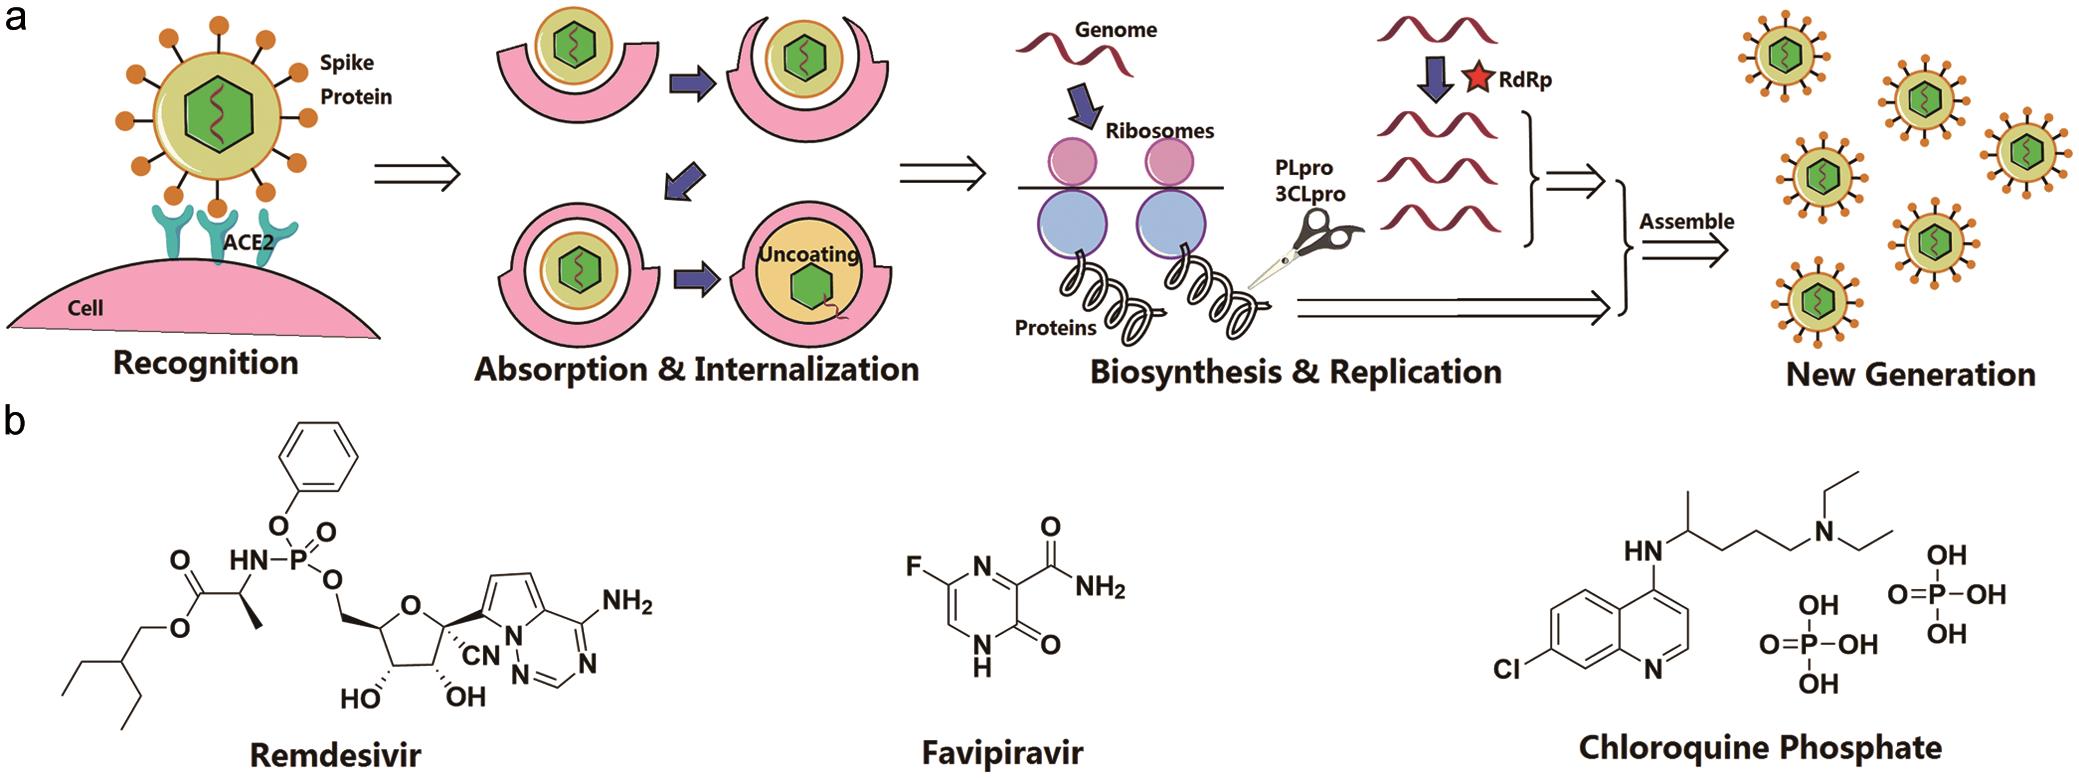 The illustration of the SARS-CoV-2 life cycle following its infection and the potential drugs for treating COVID-19.